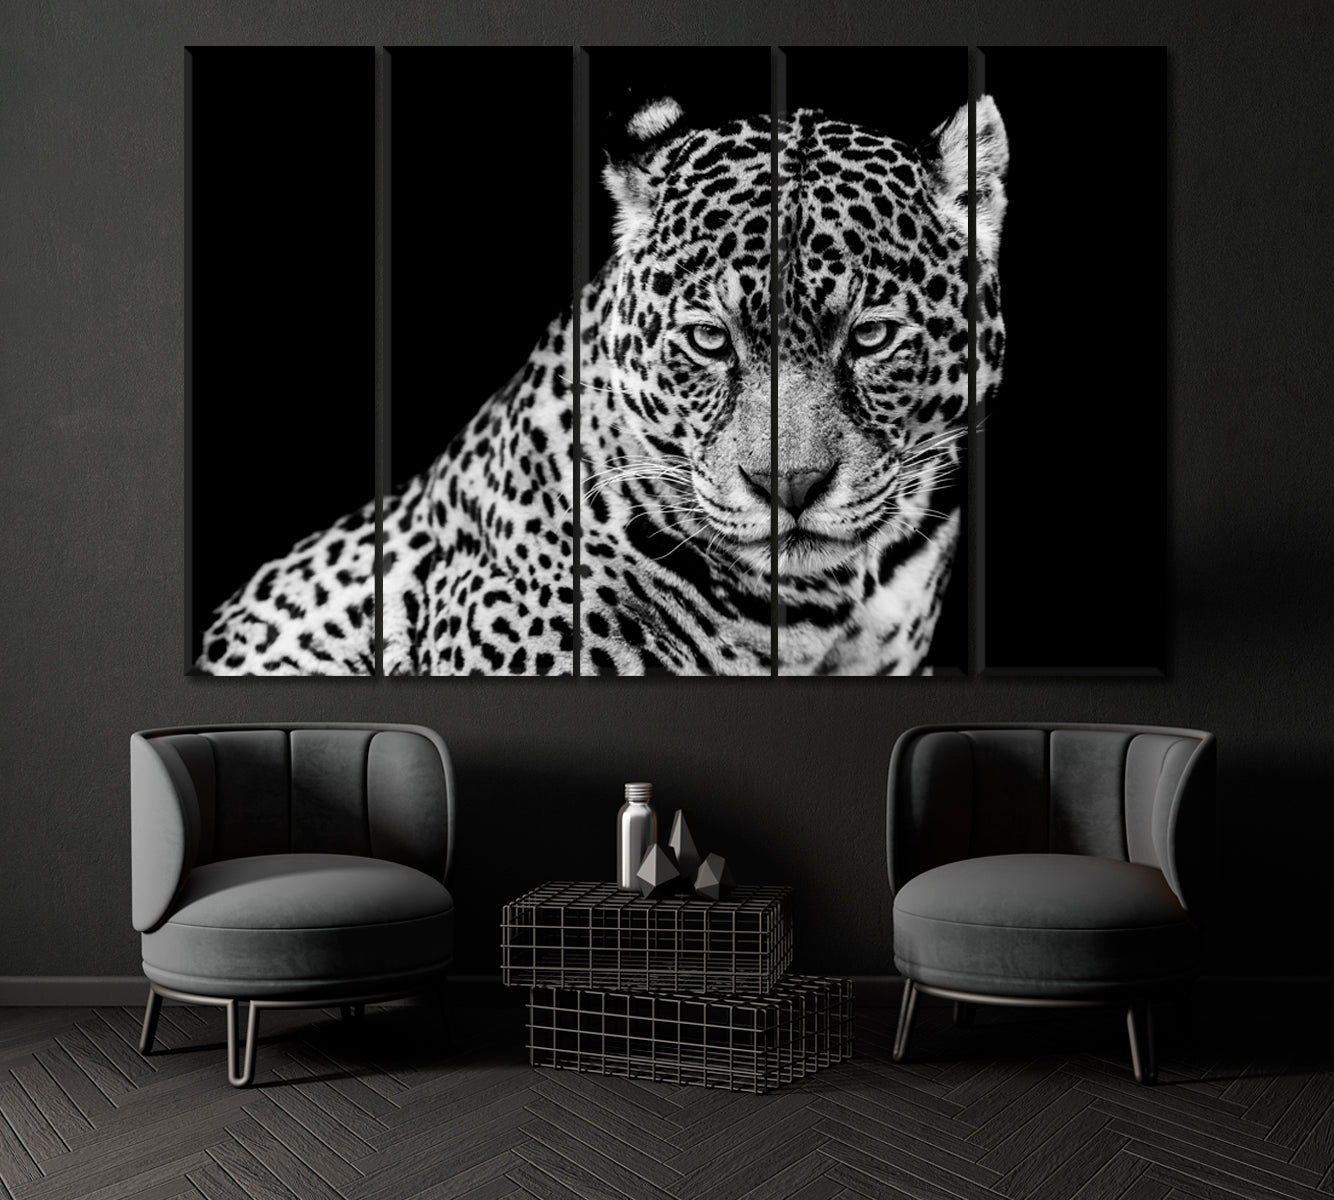 Angry Jaguar in B&W Canvas Print ArtLexy 5 Panels 36"x24" inches 